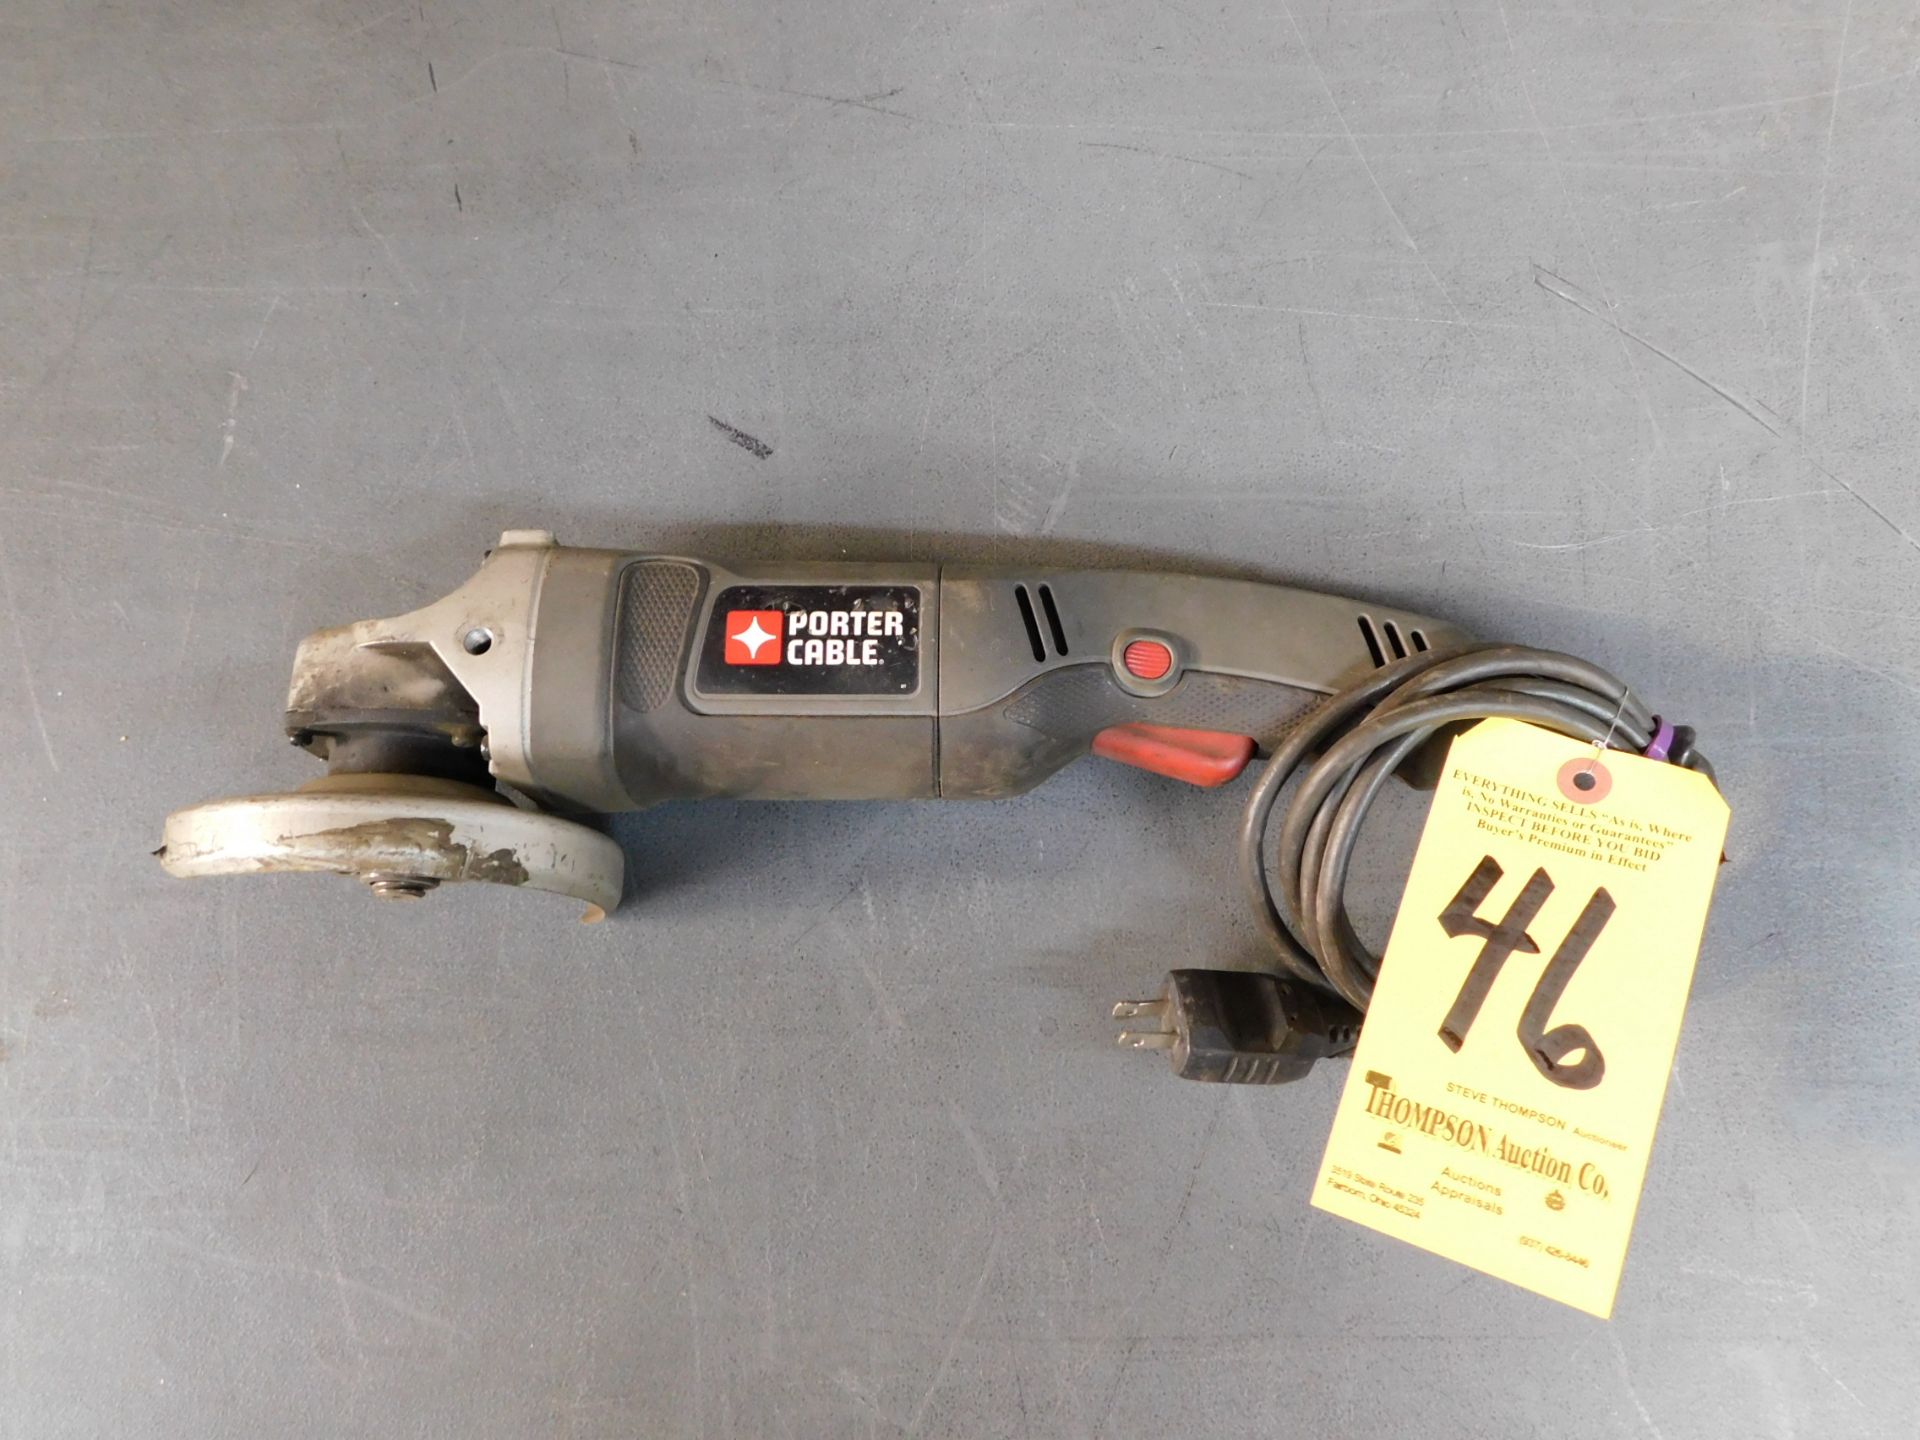 Porter Cable 4 1/2" Right Angle Grinder